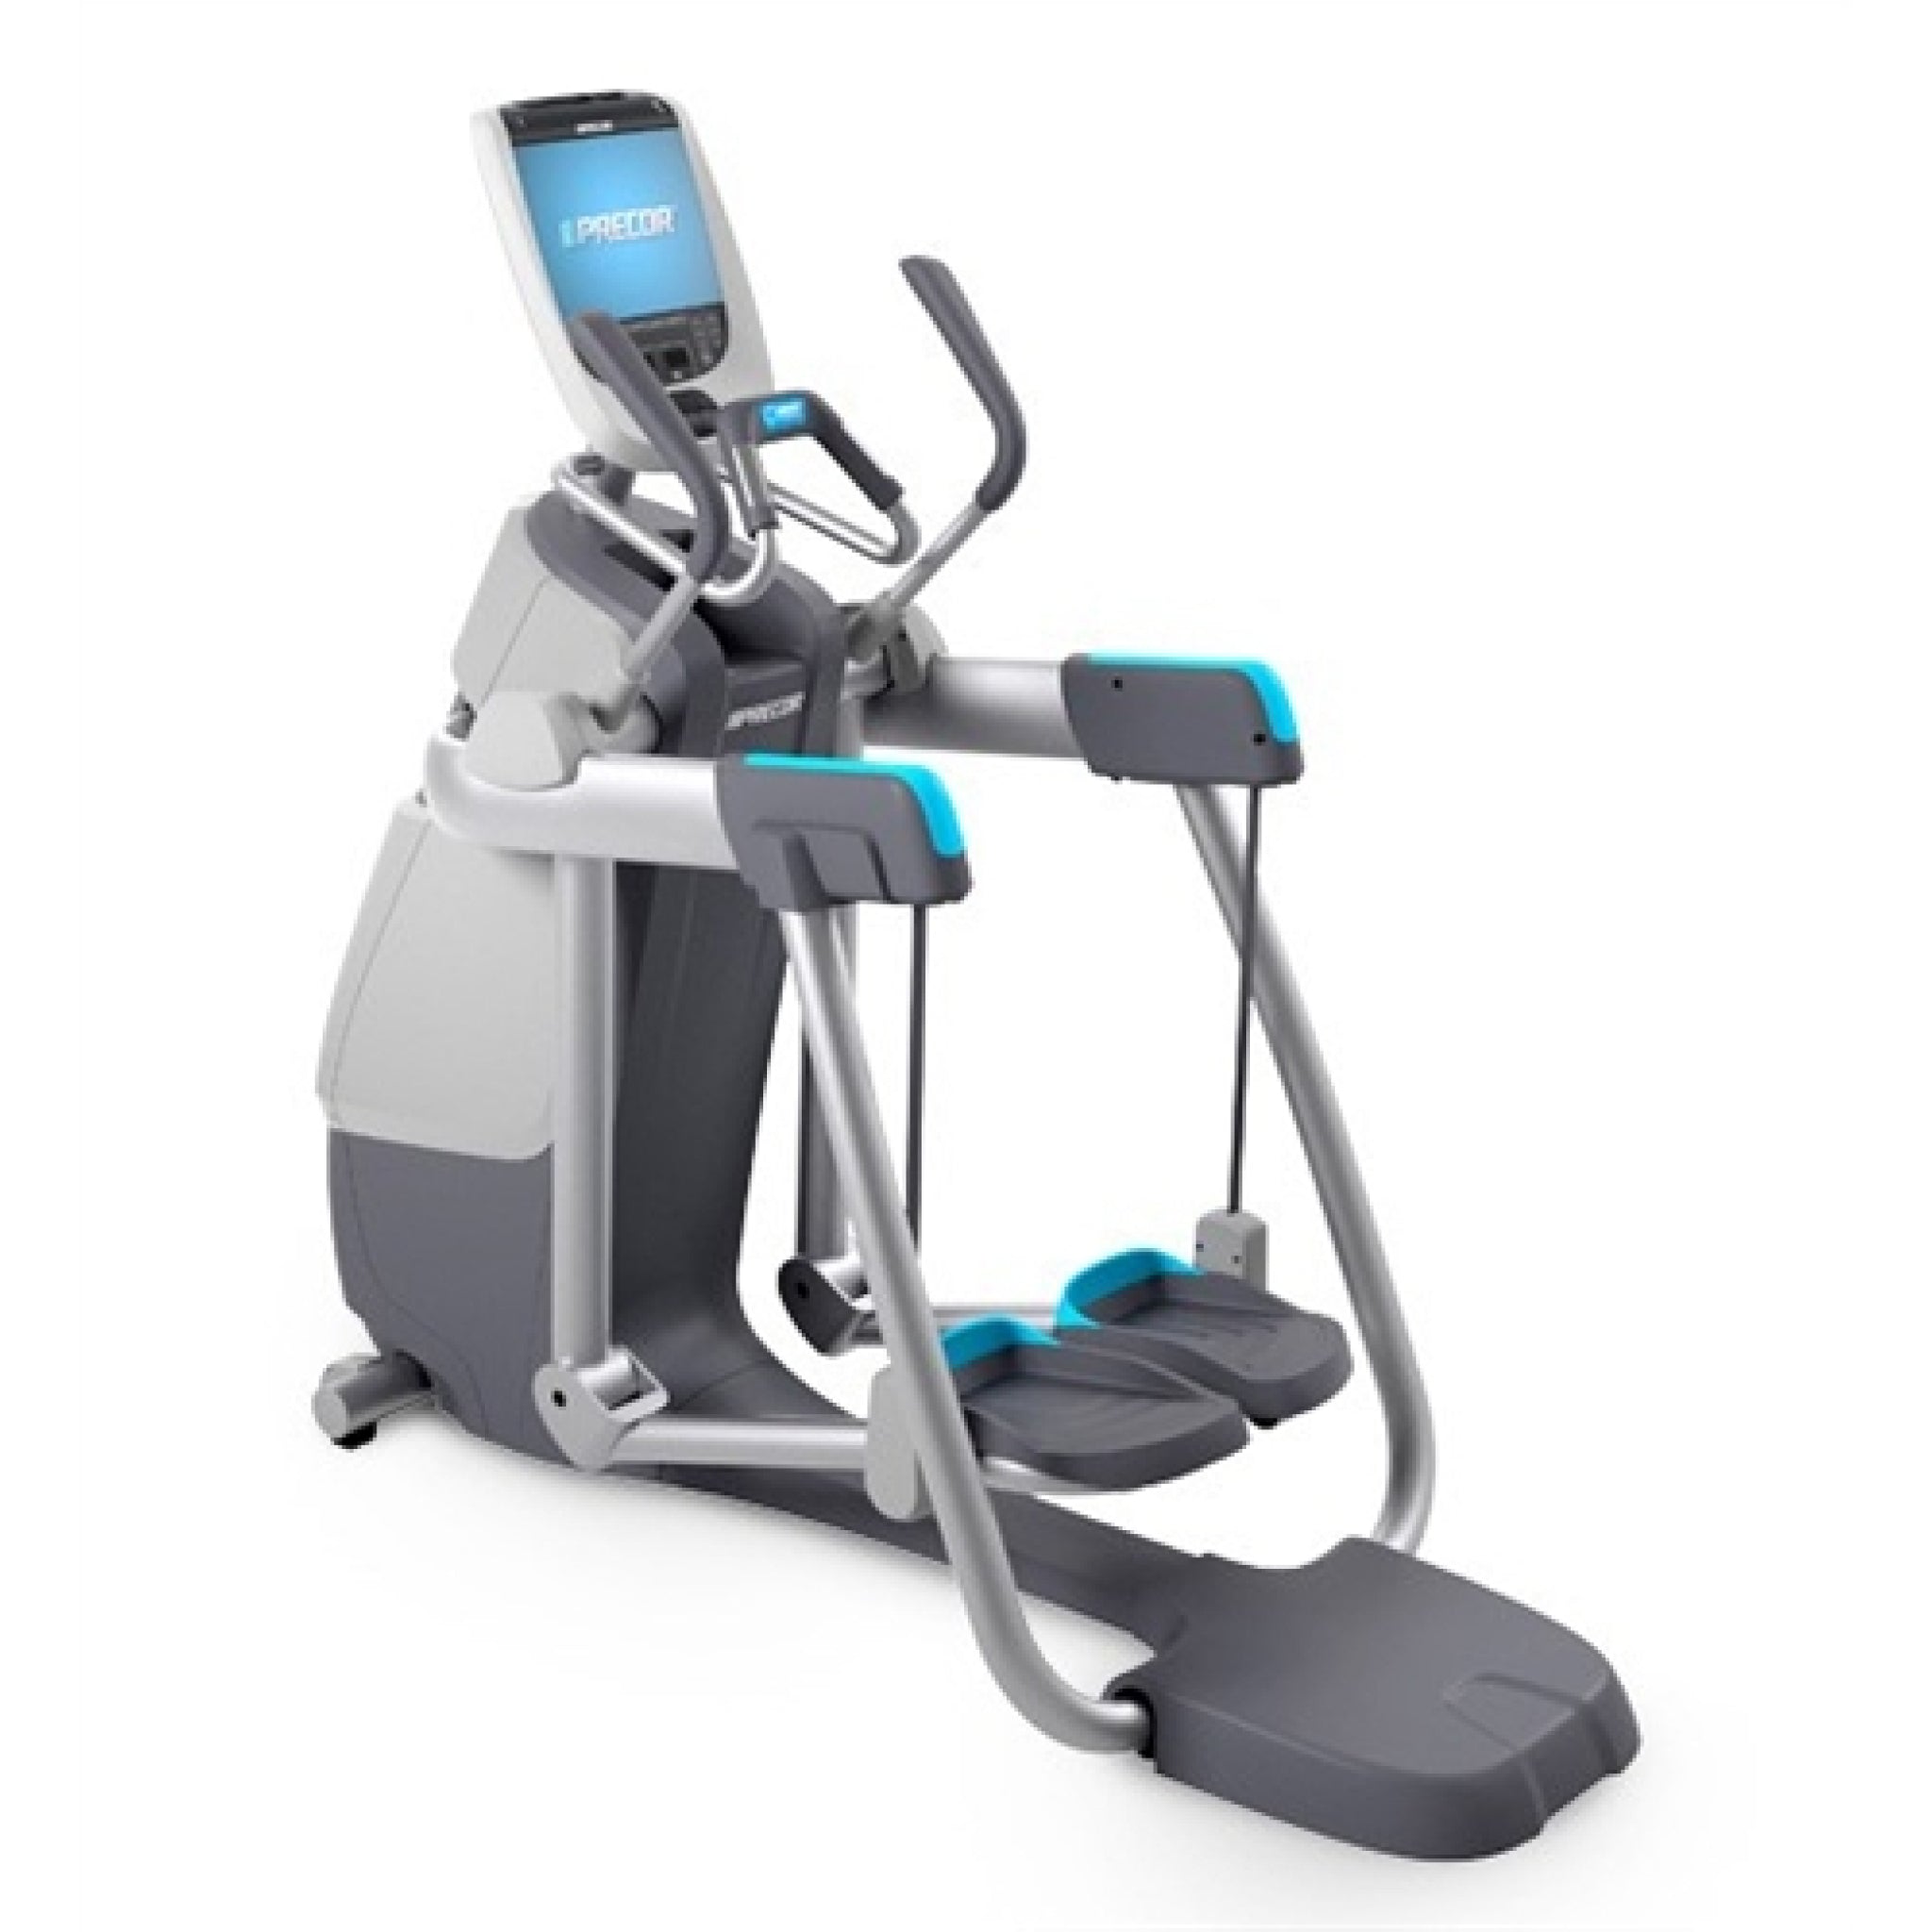 Front left view of the Precor AMT 885 Open Stride Elliptical